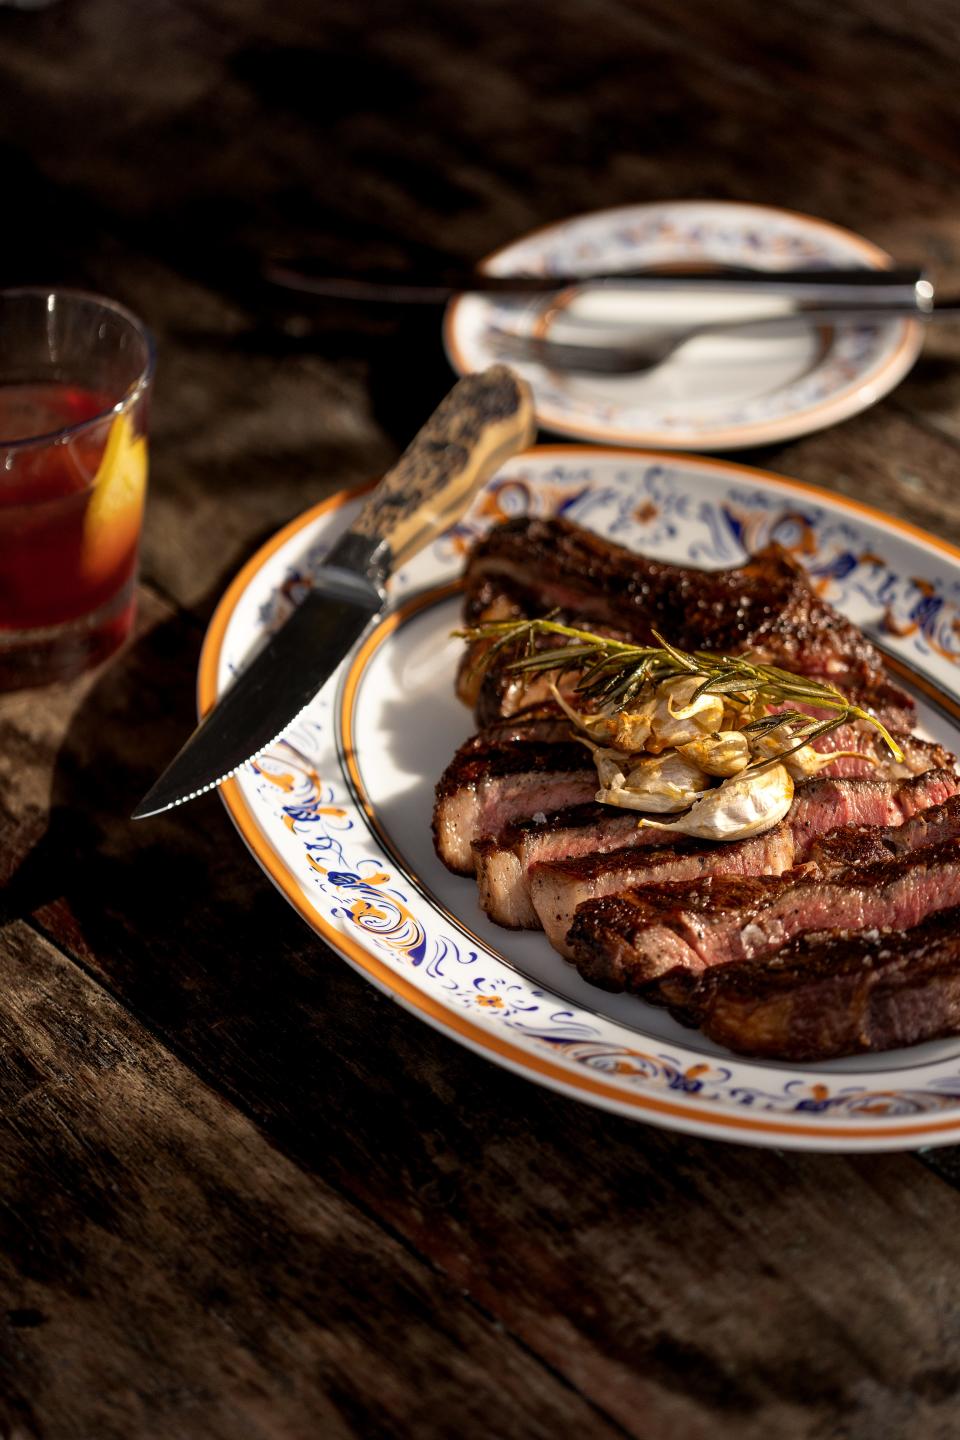 Let dad go full-on carnivore at Elisabetta's with their dry-aged, bone-in ribeye in either a 16-ounce or 24-ounce portion.